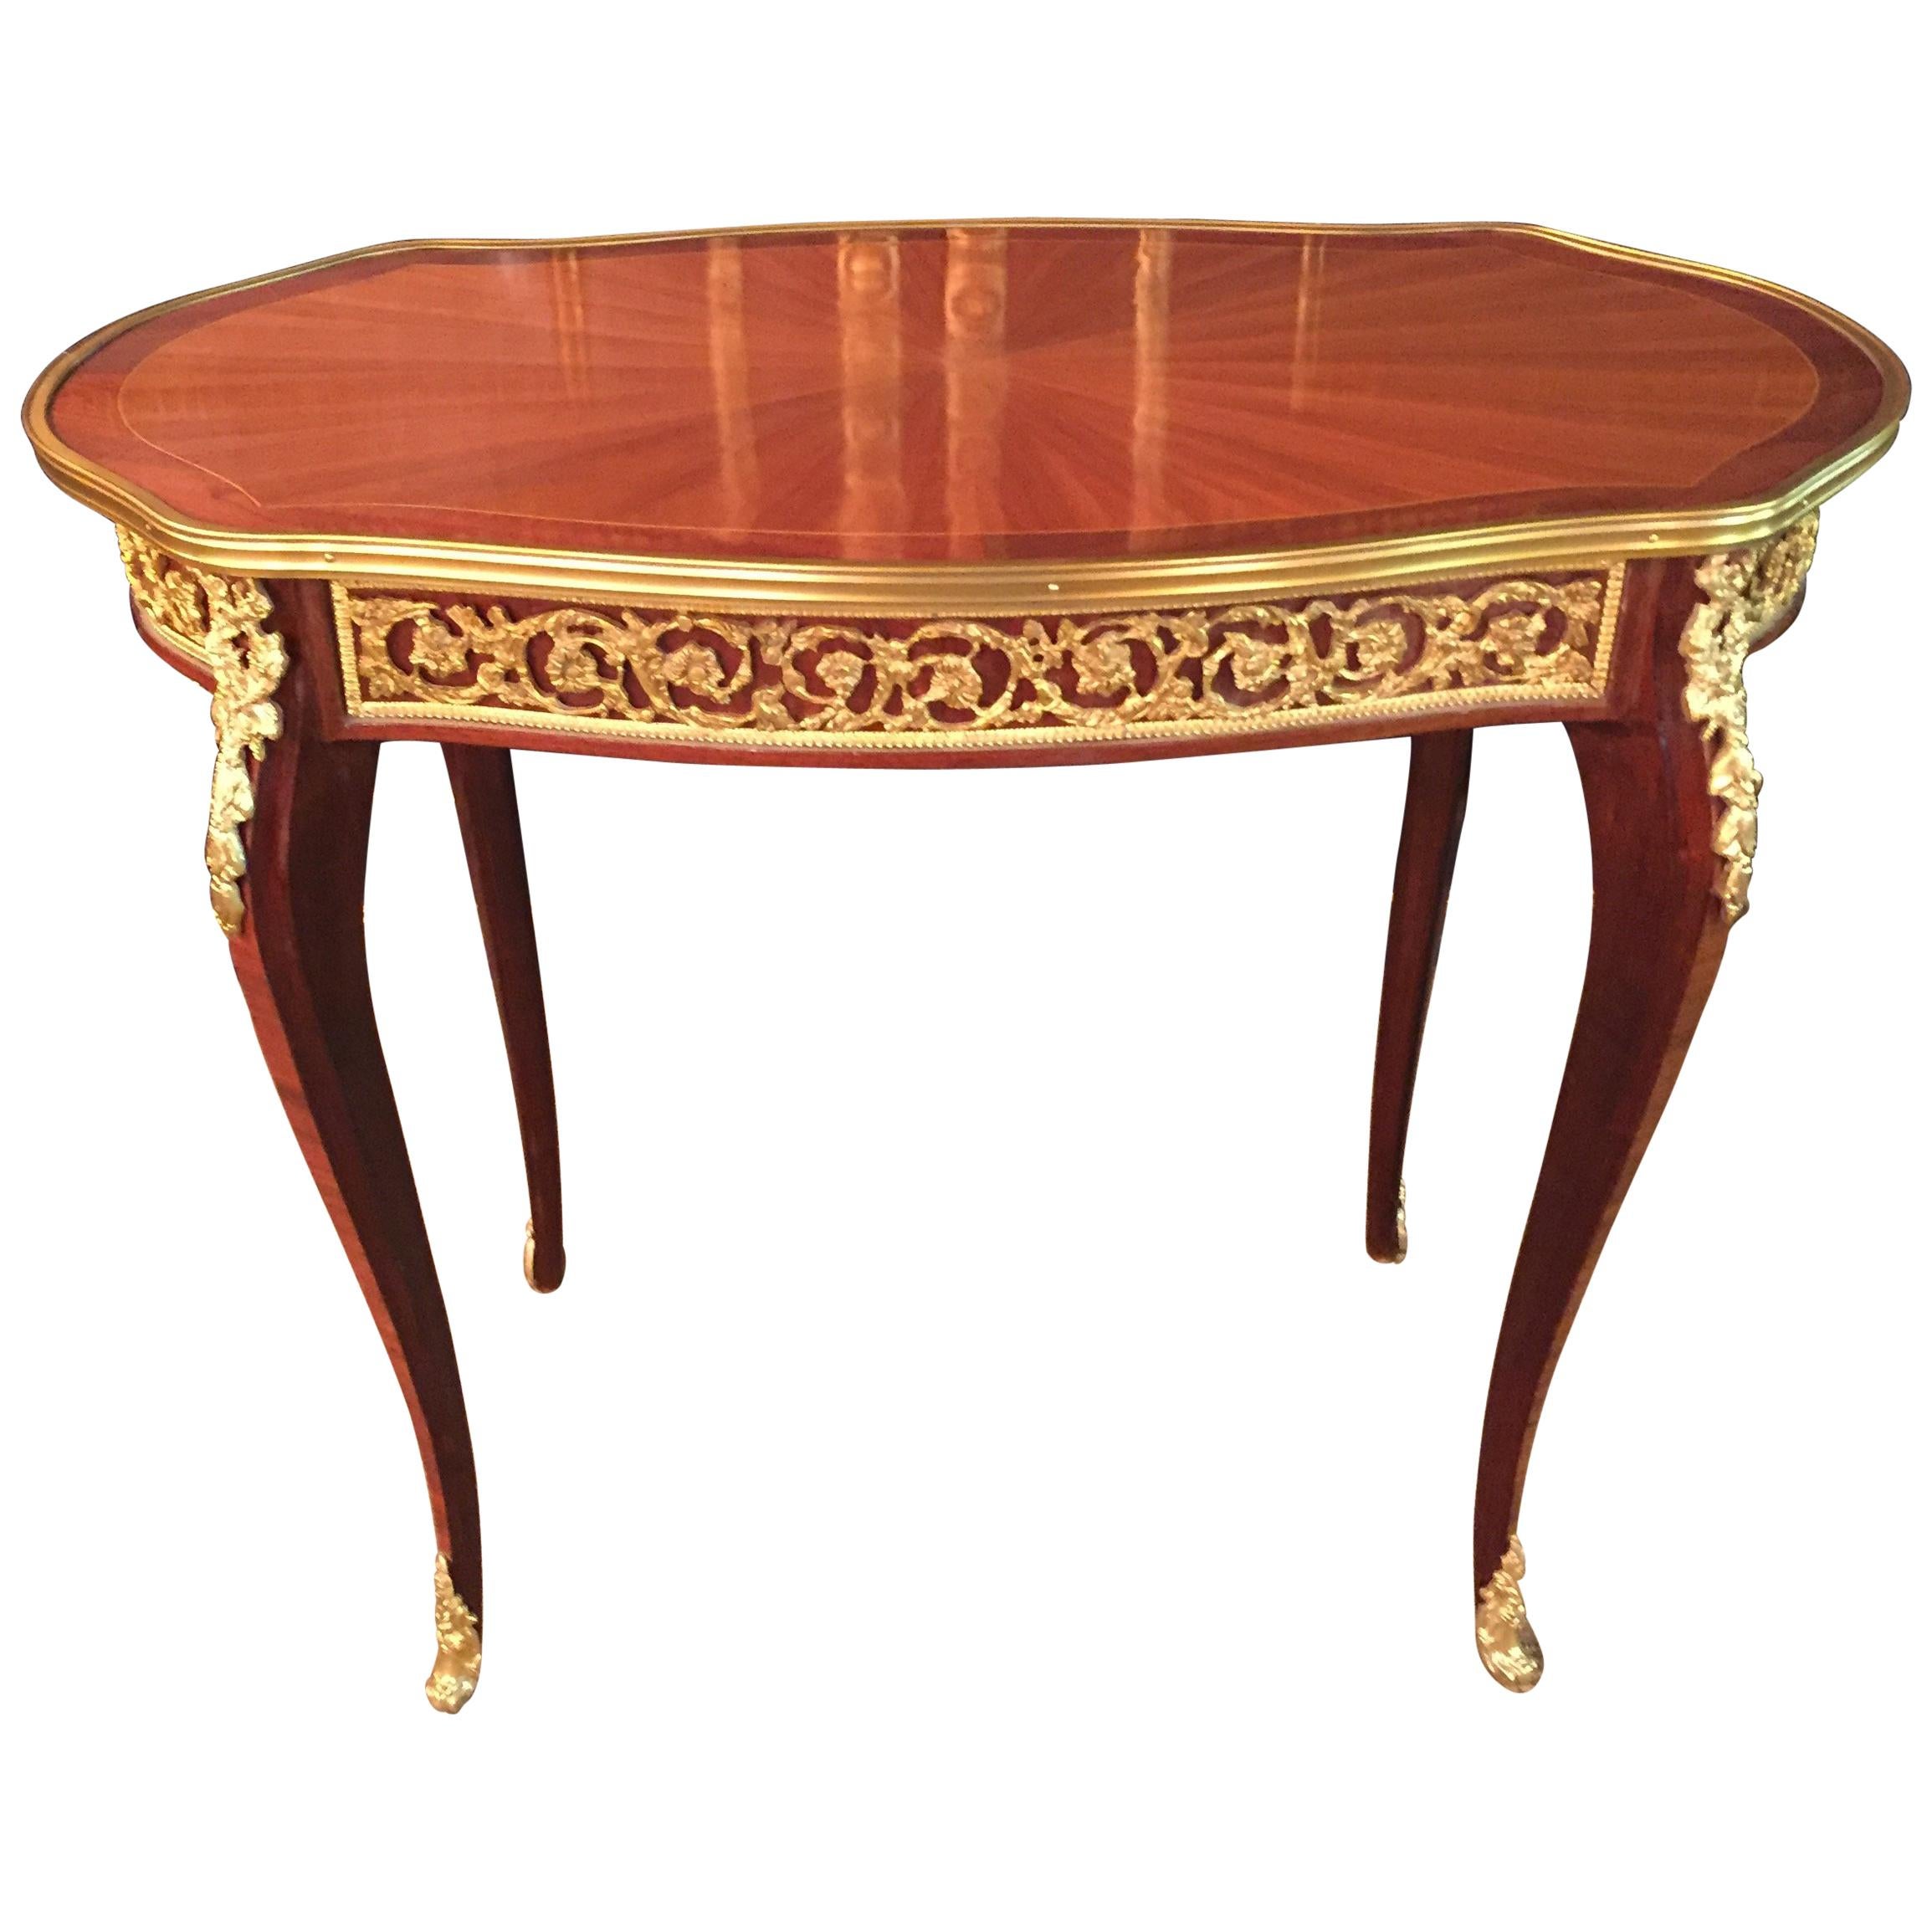 Unique French Salon Table in Transition Style, Rosewood Veneer on Beech